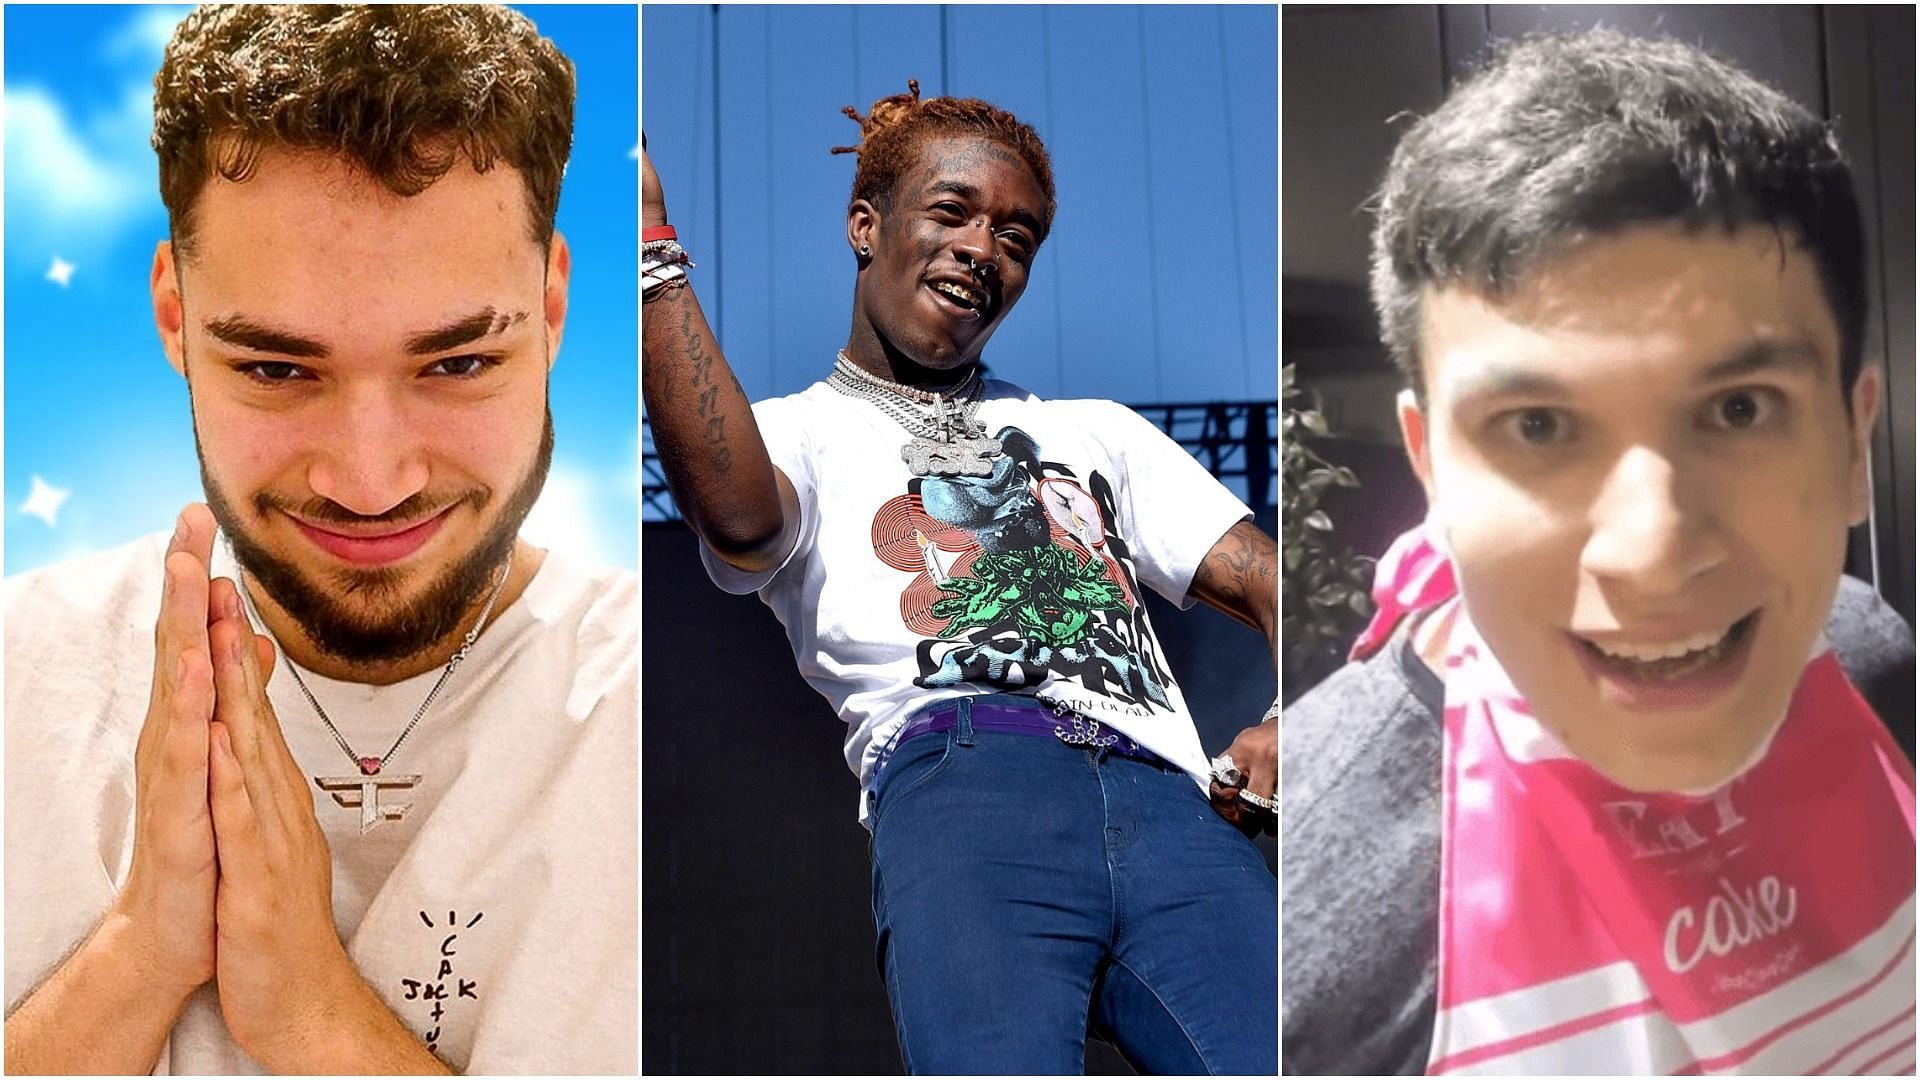 Lil Uzi Vert recognized Trainwrecktv on Adin Ross&#039; stream (Image via TopTwitchStreamers, Adin Live - Youtube and The Rolling Stones)